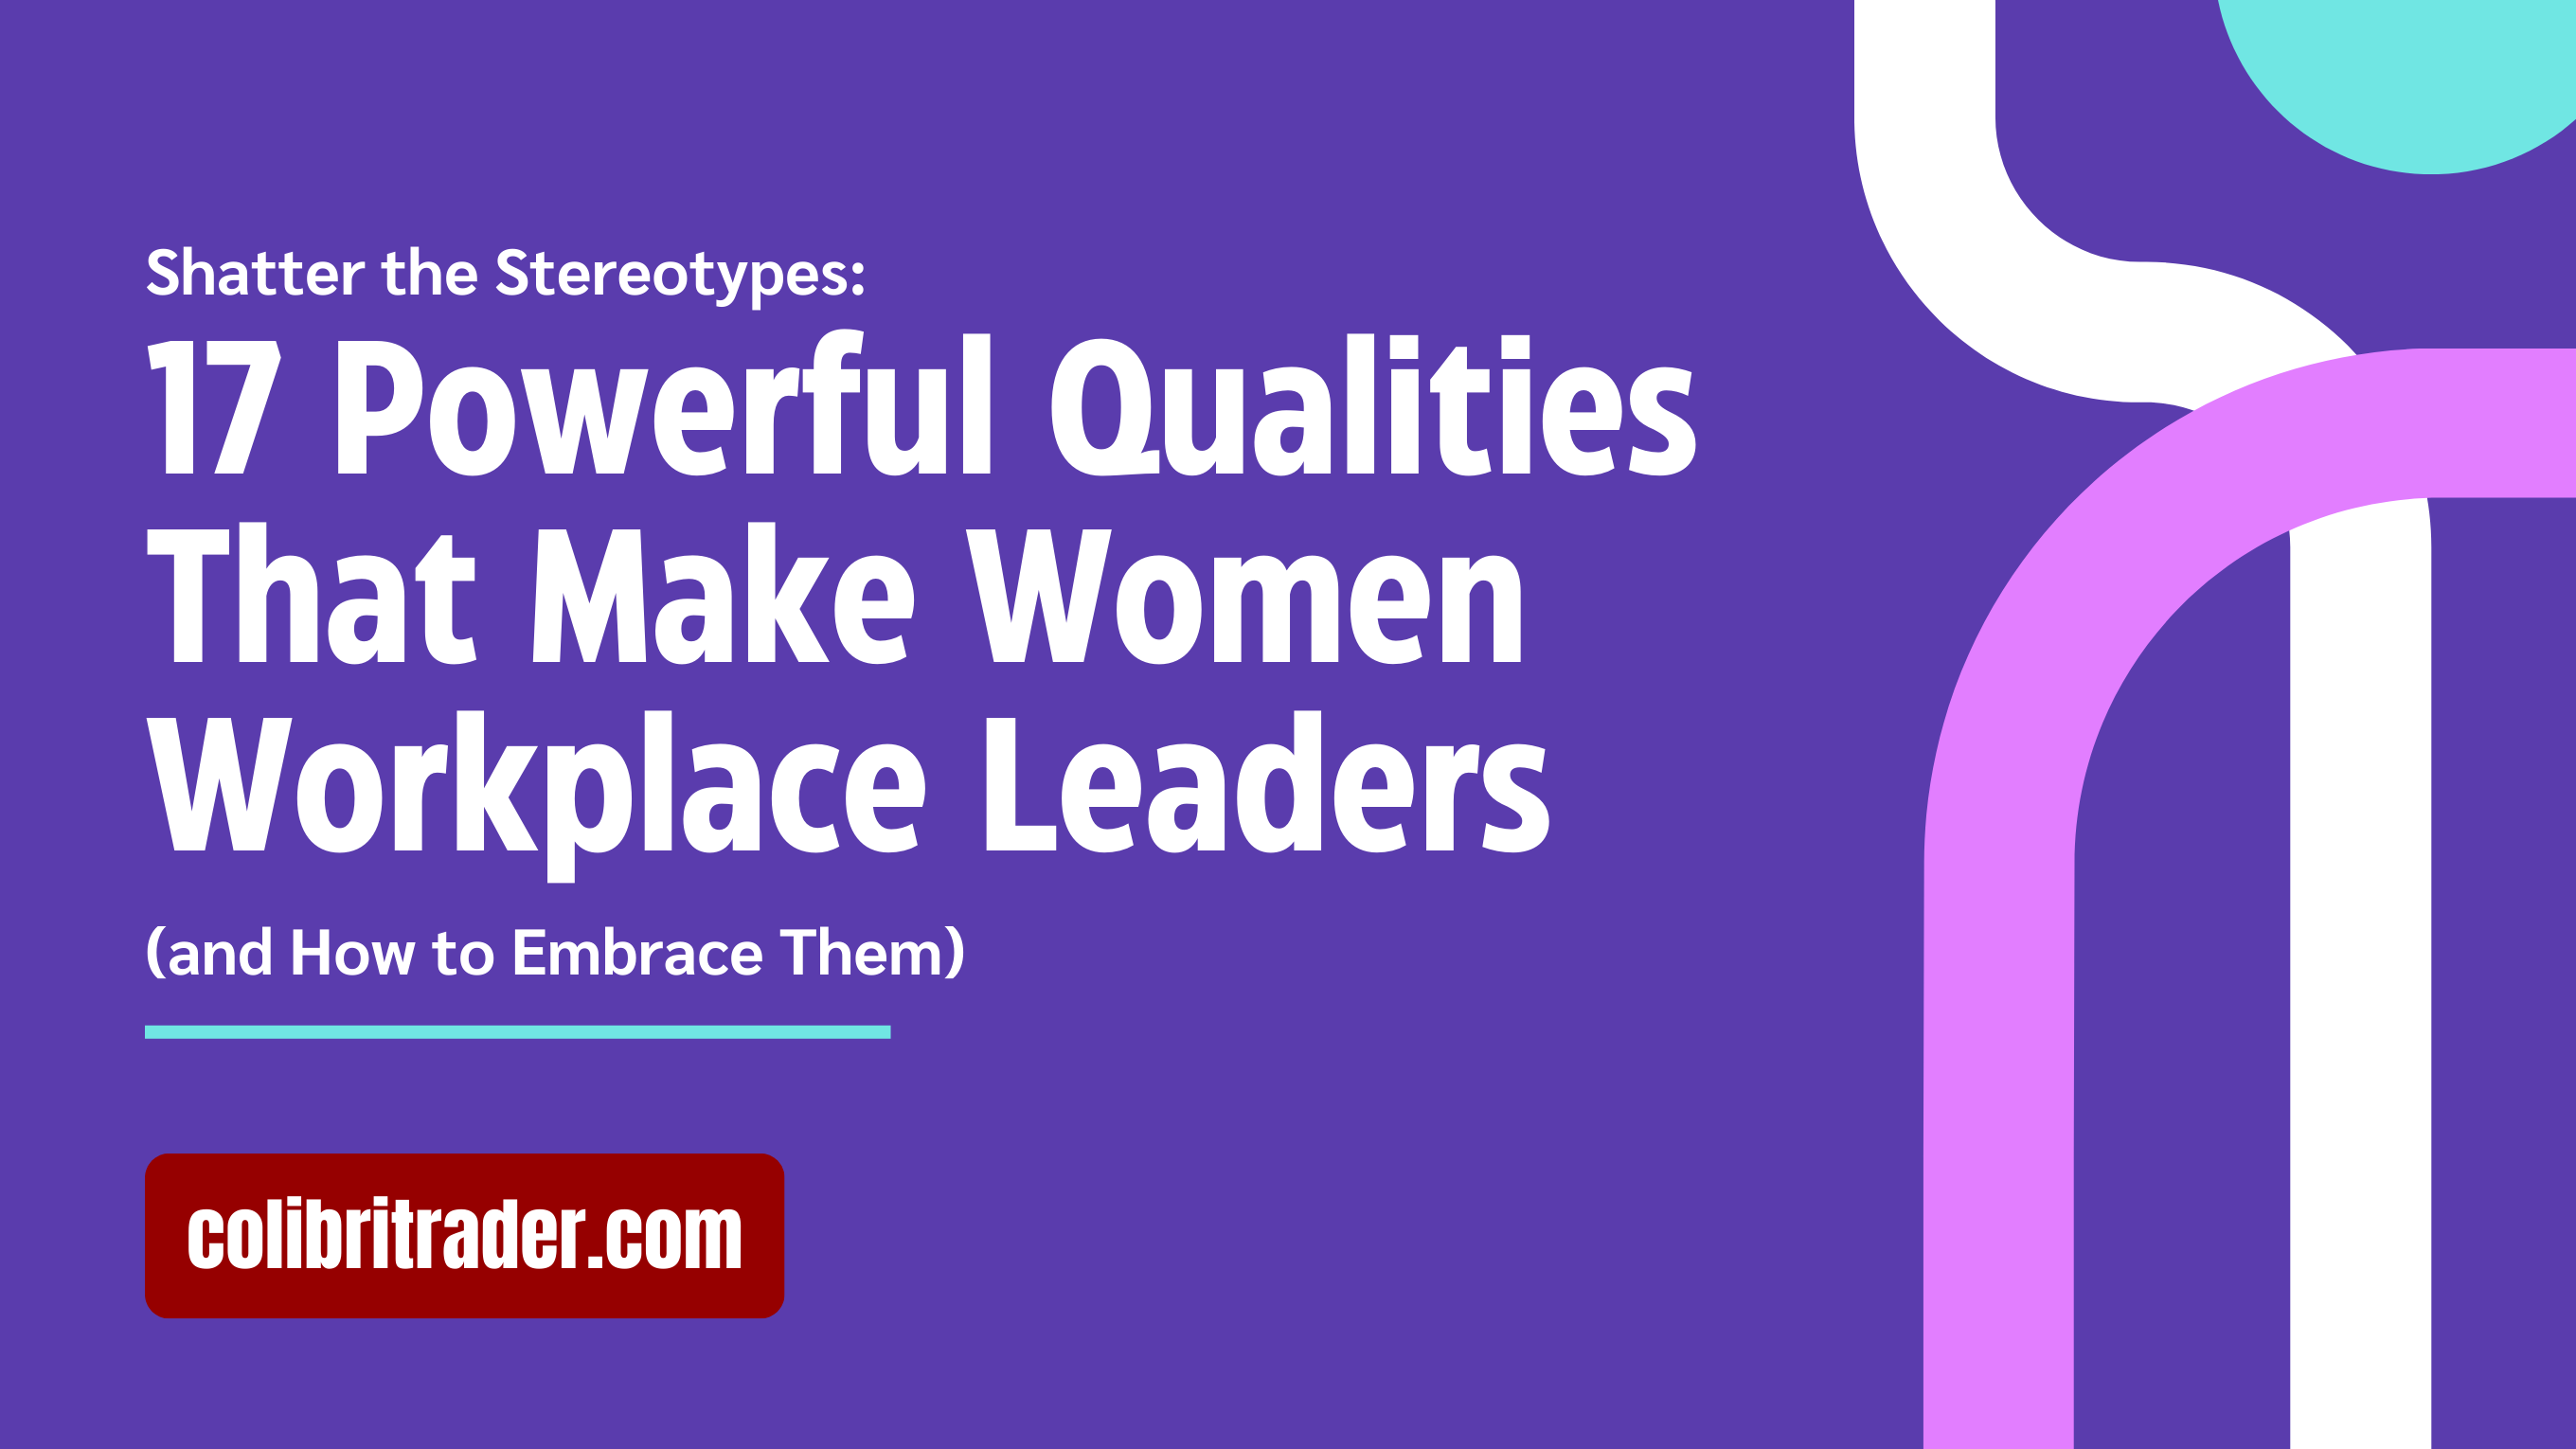 Shatter the Stereotypes: 17 Powerful Qualities That Make Women Workplace Leaders (and How to Embrace Them)